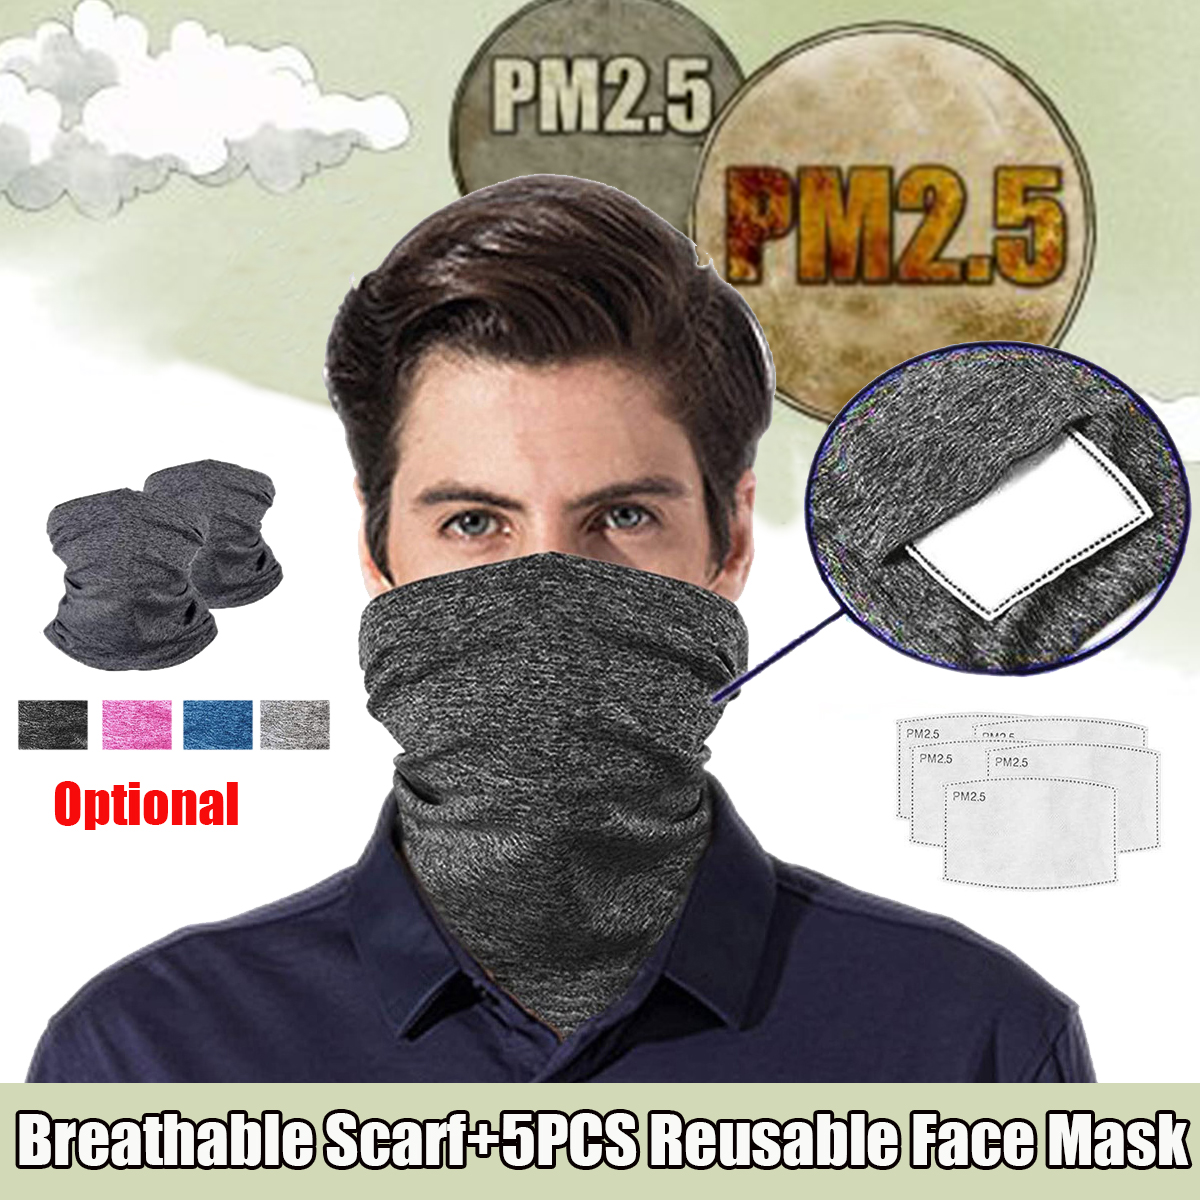 Outdoor-Dustproof-Breathable-Sport-Head-Scarves-Face-Mask-With-5-Filter-Pads-Windproof-PM25-Sunscree-1683314-1